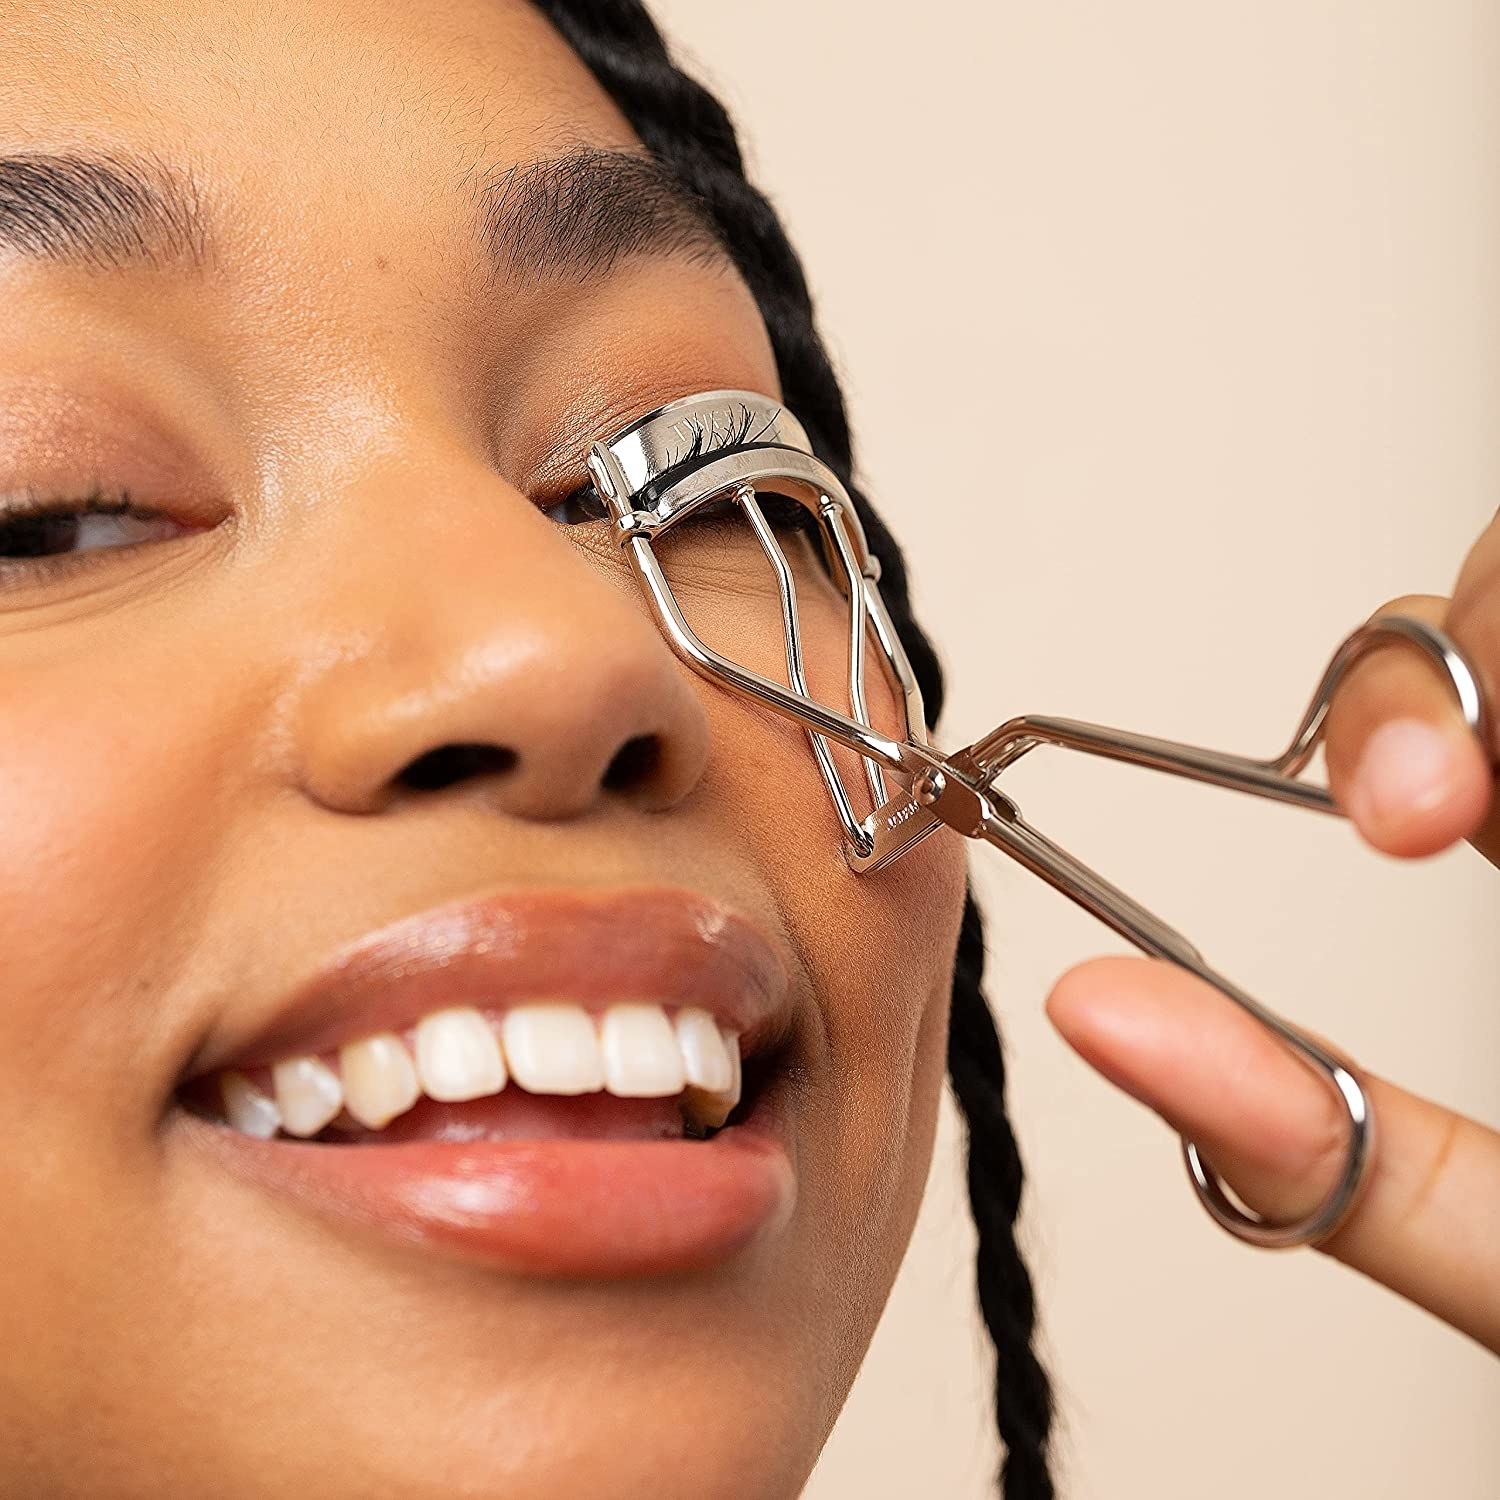 A person using the eyelash curler to curl their lashes